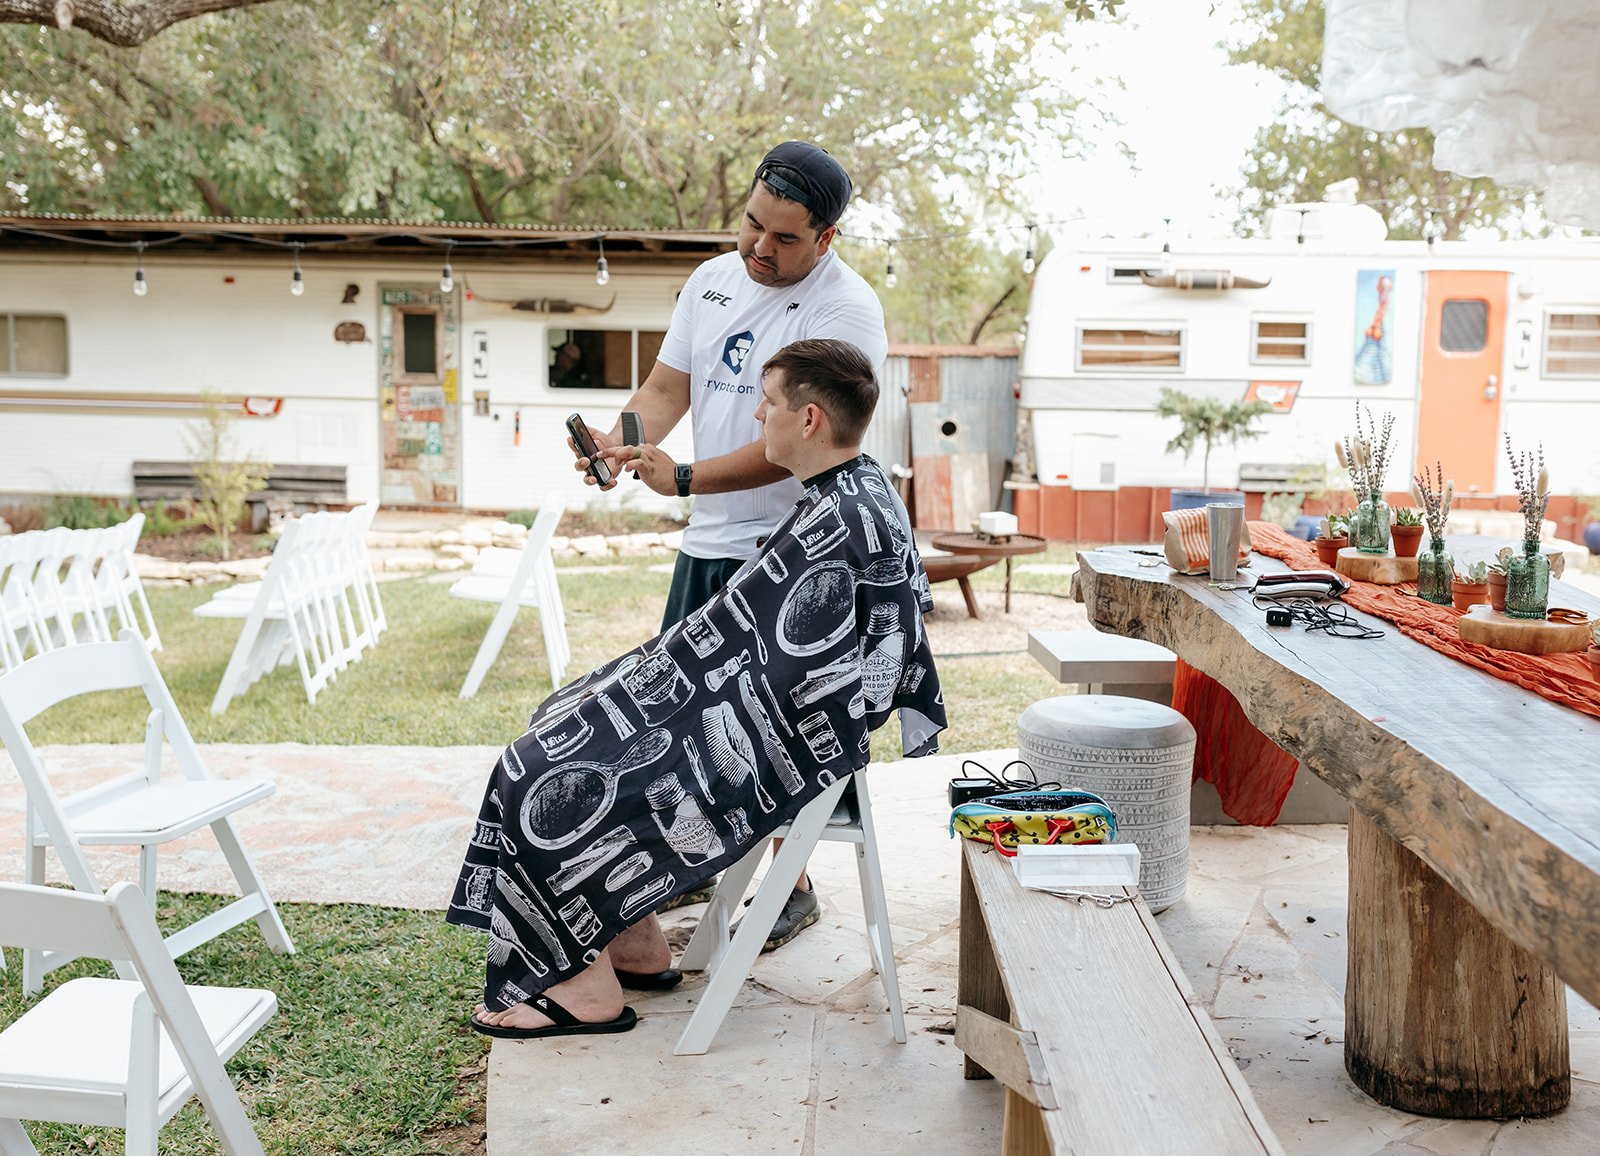 James getting a haircut before the ceremony on the beautiful outdoor grounds of the camp